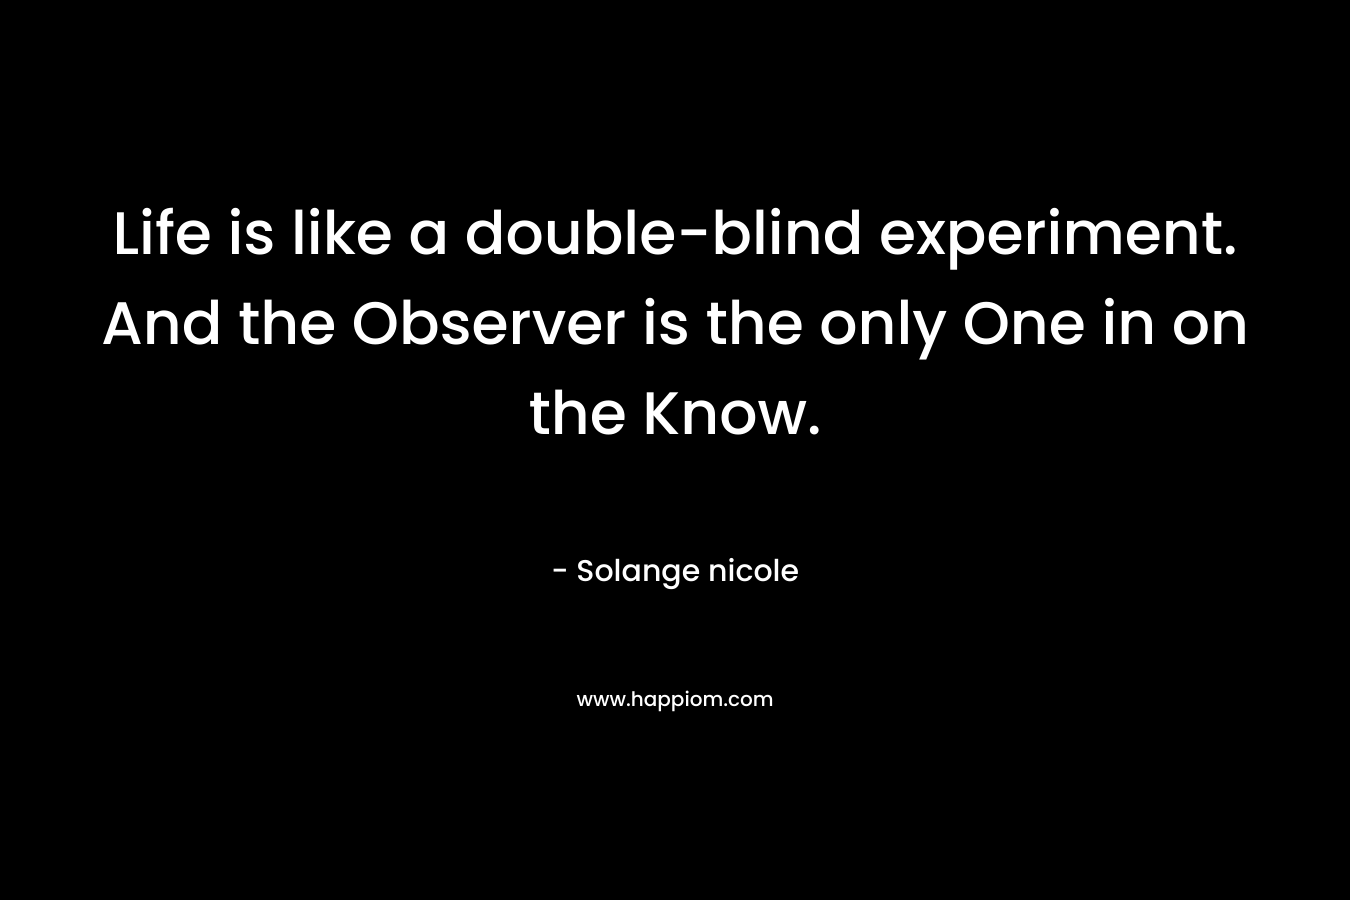 Life is like a double-blind experiment. And the Observer is the only One in on the Know. – Solange nicole